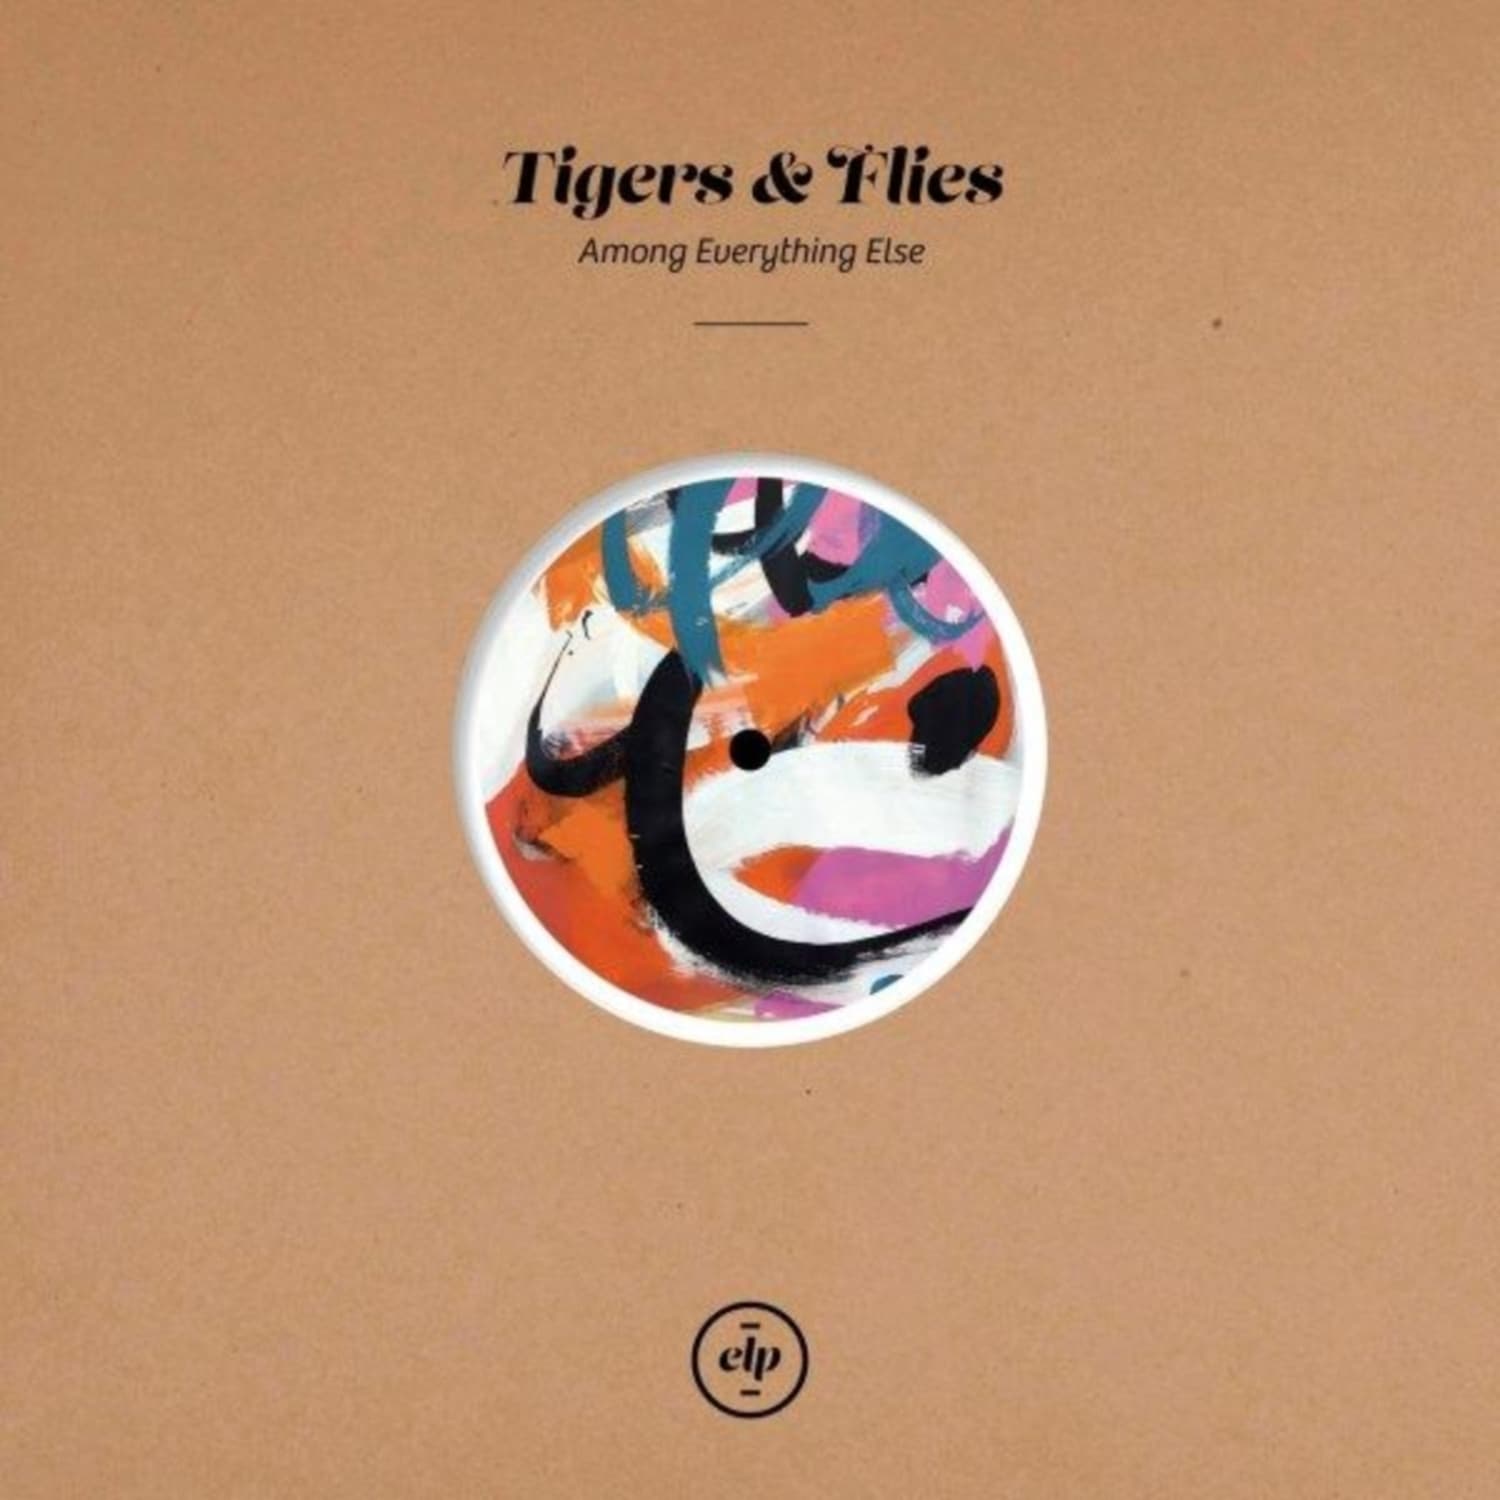 Tiger & Flies - AMONG EVERYTHING ELSE 